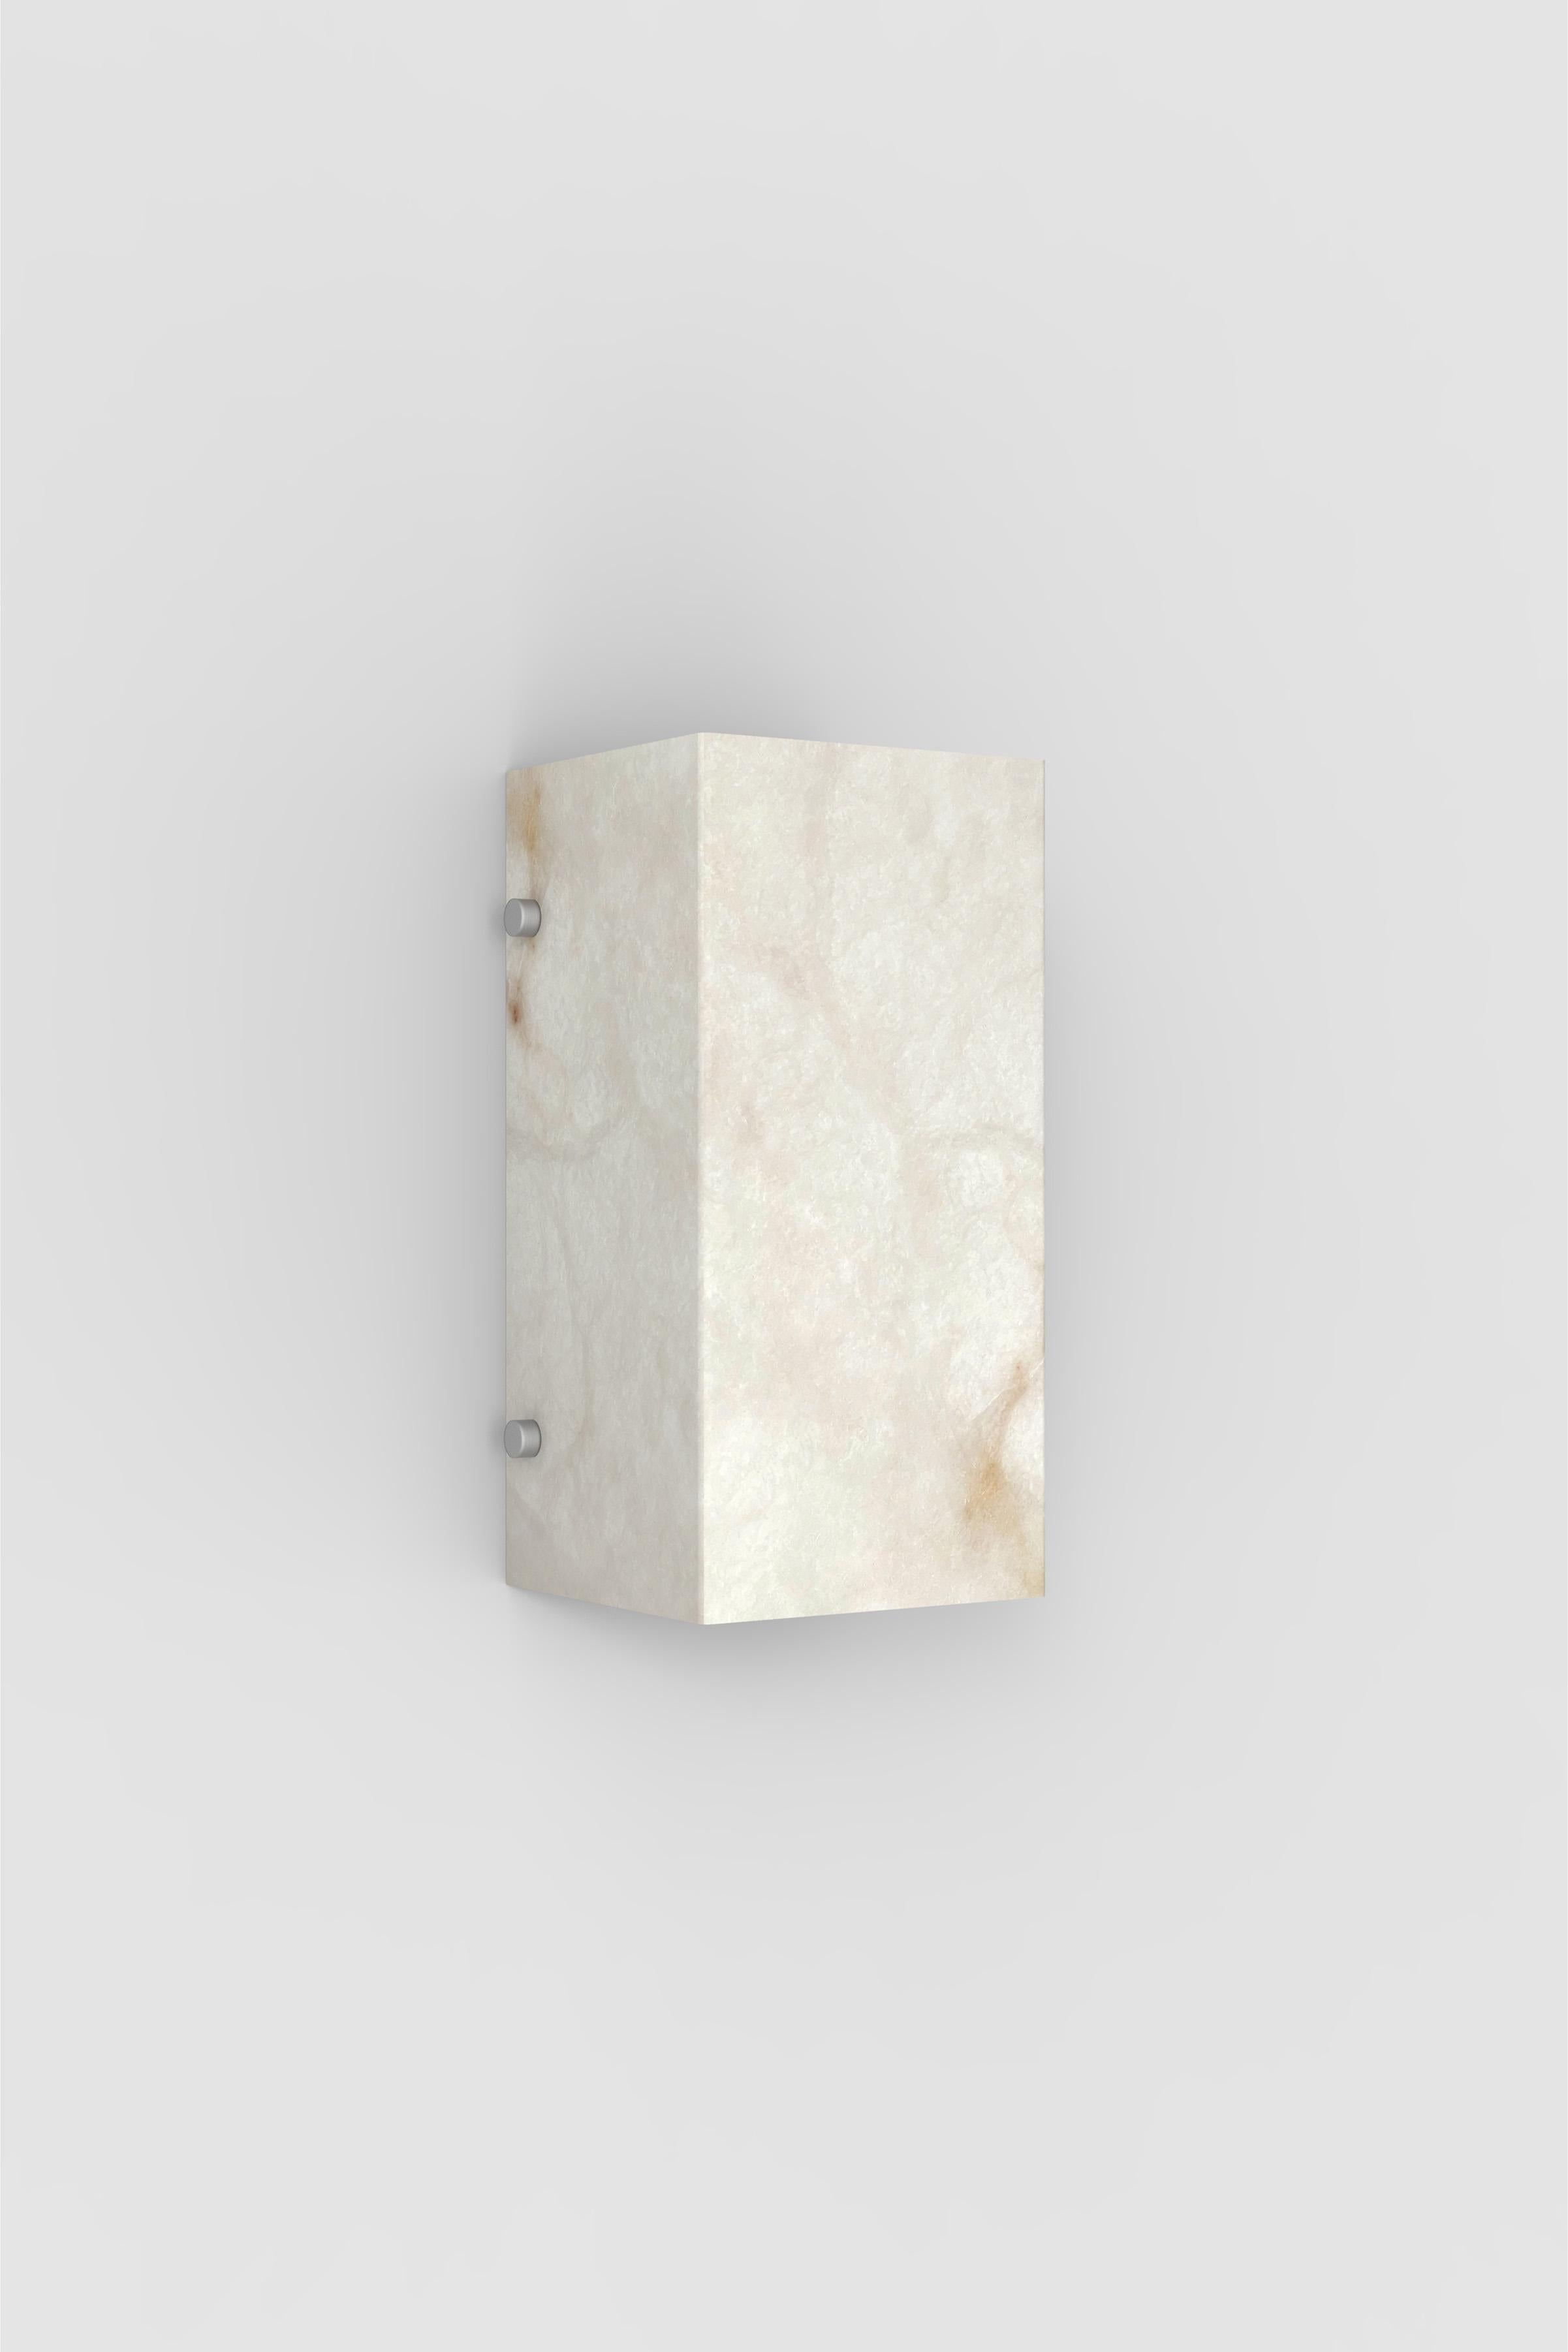 Post-Modern Contemporary Ponti Half Sconce 003A in Alabaster Orphan Work For Sale